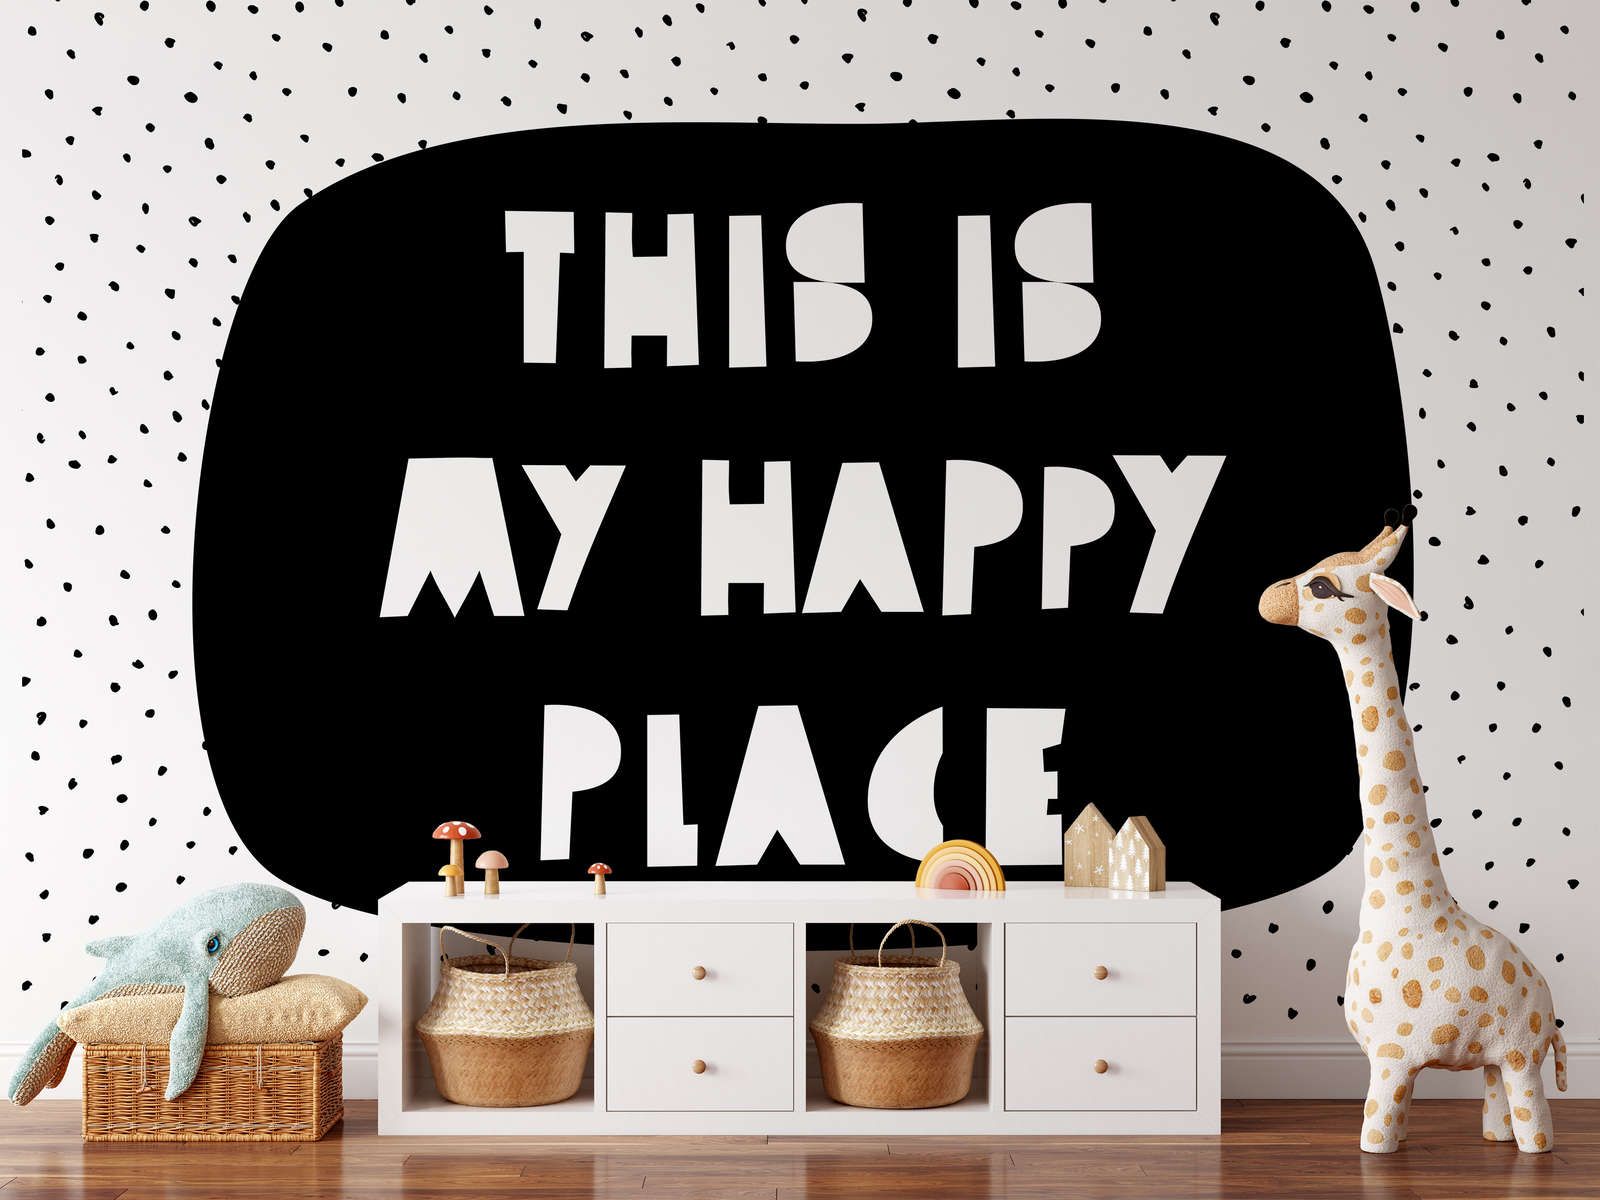             Photo wallpaper for children's room with lettering "This is my happy place" - Smooth & matt non-woven
        